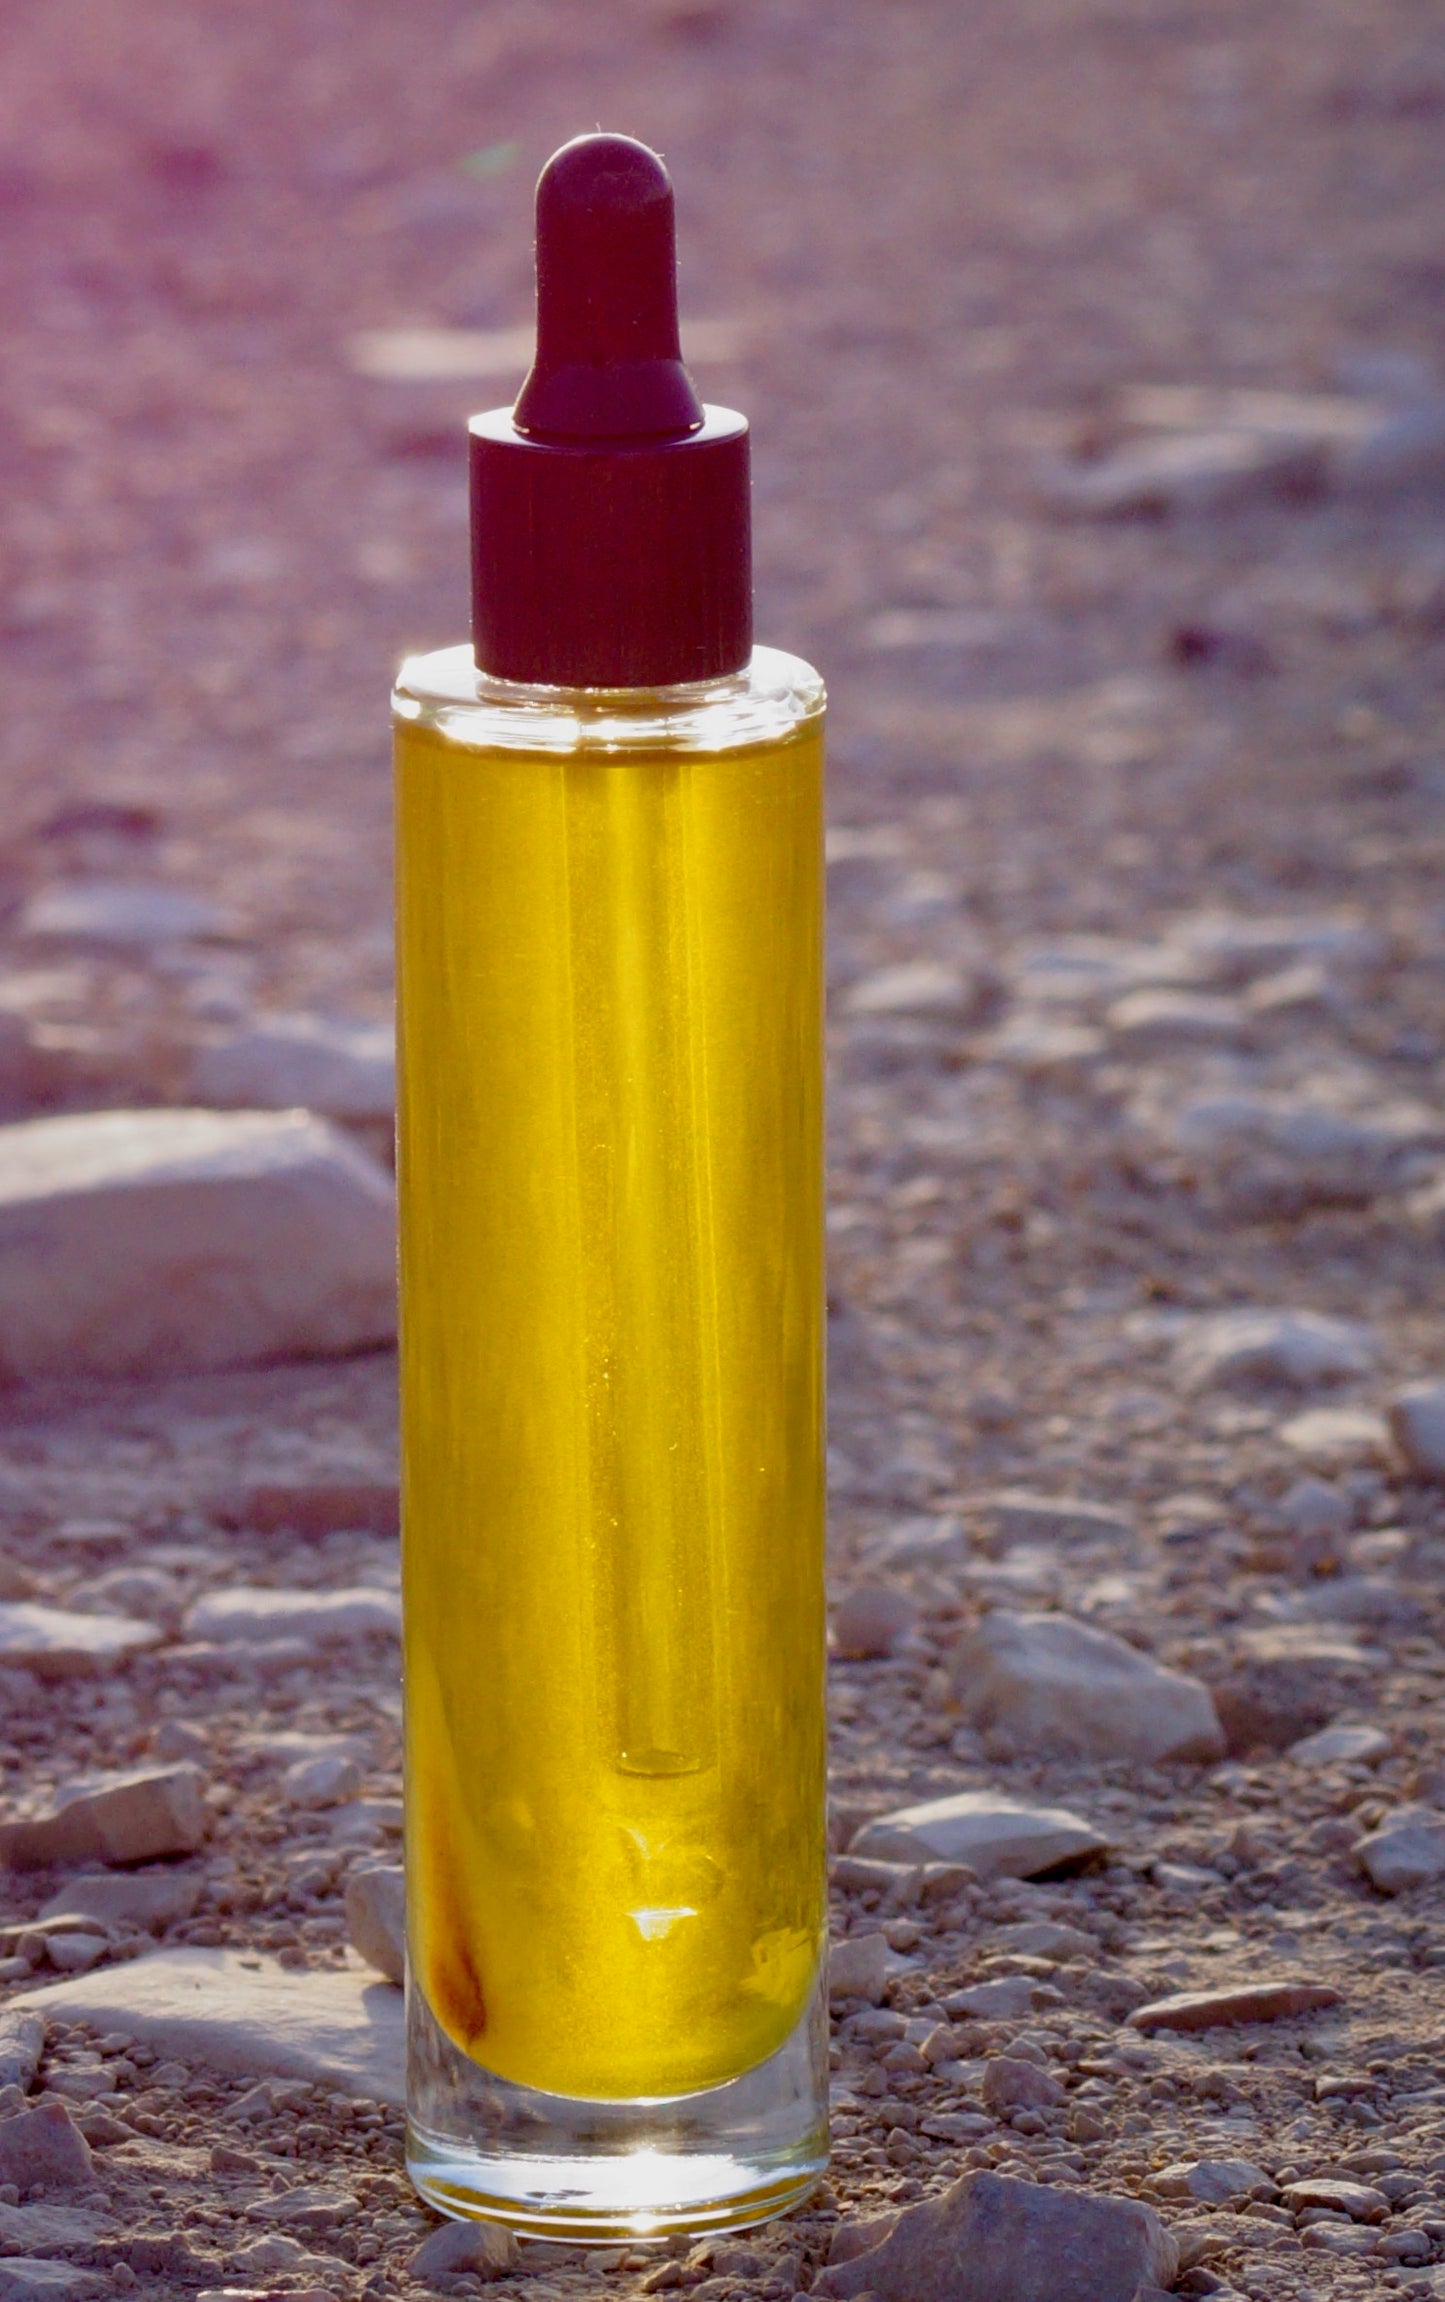 Naturally Scented Hair & Beard Oil